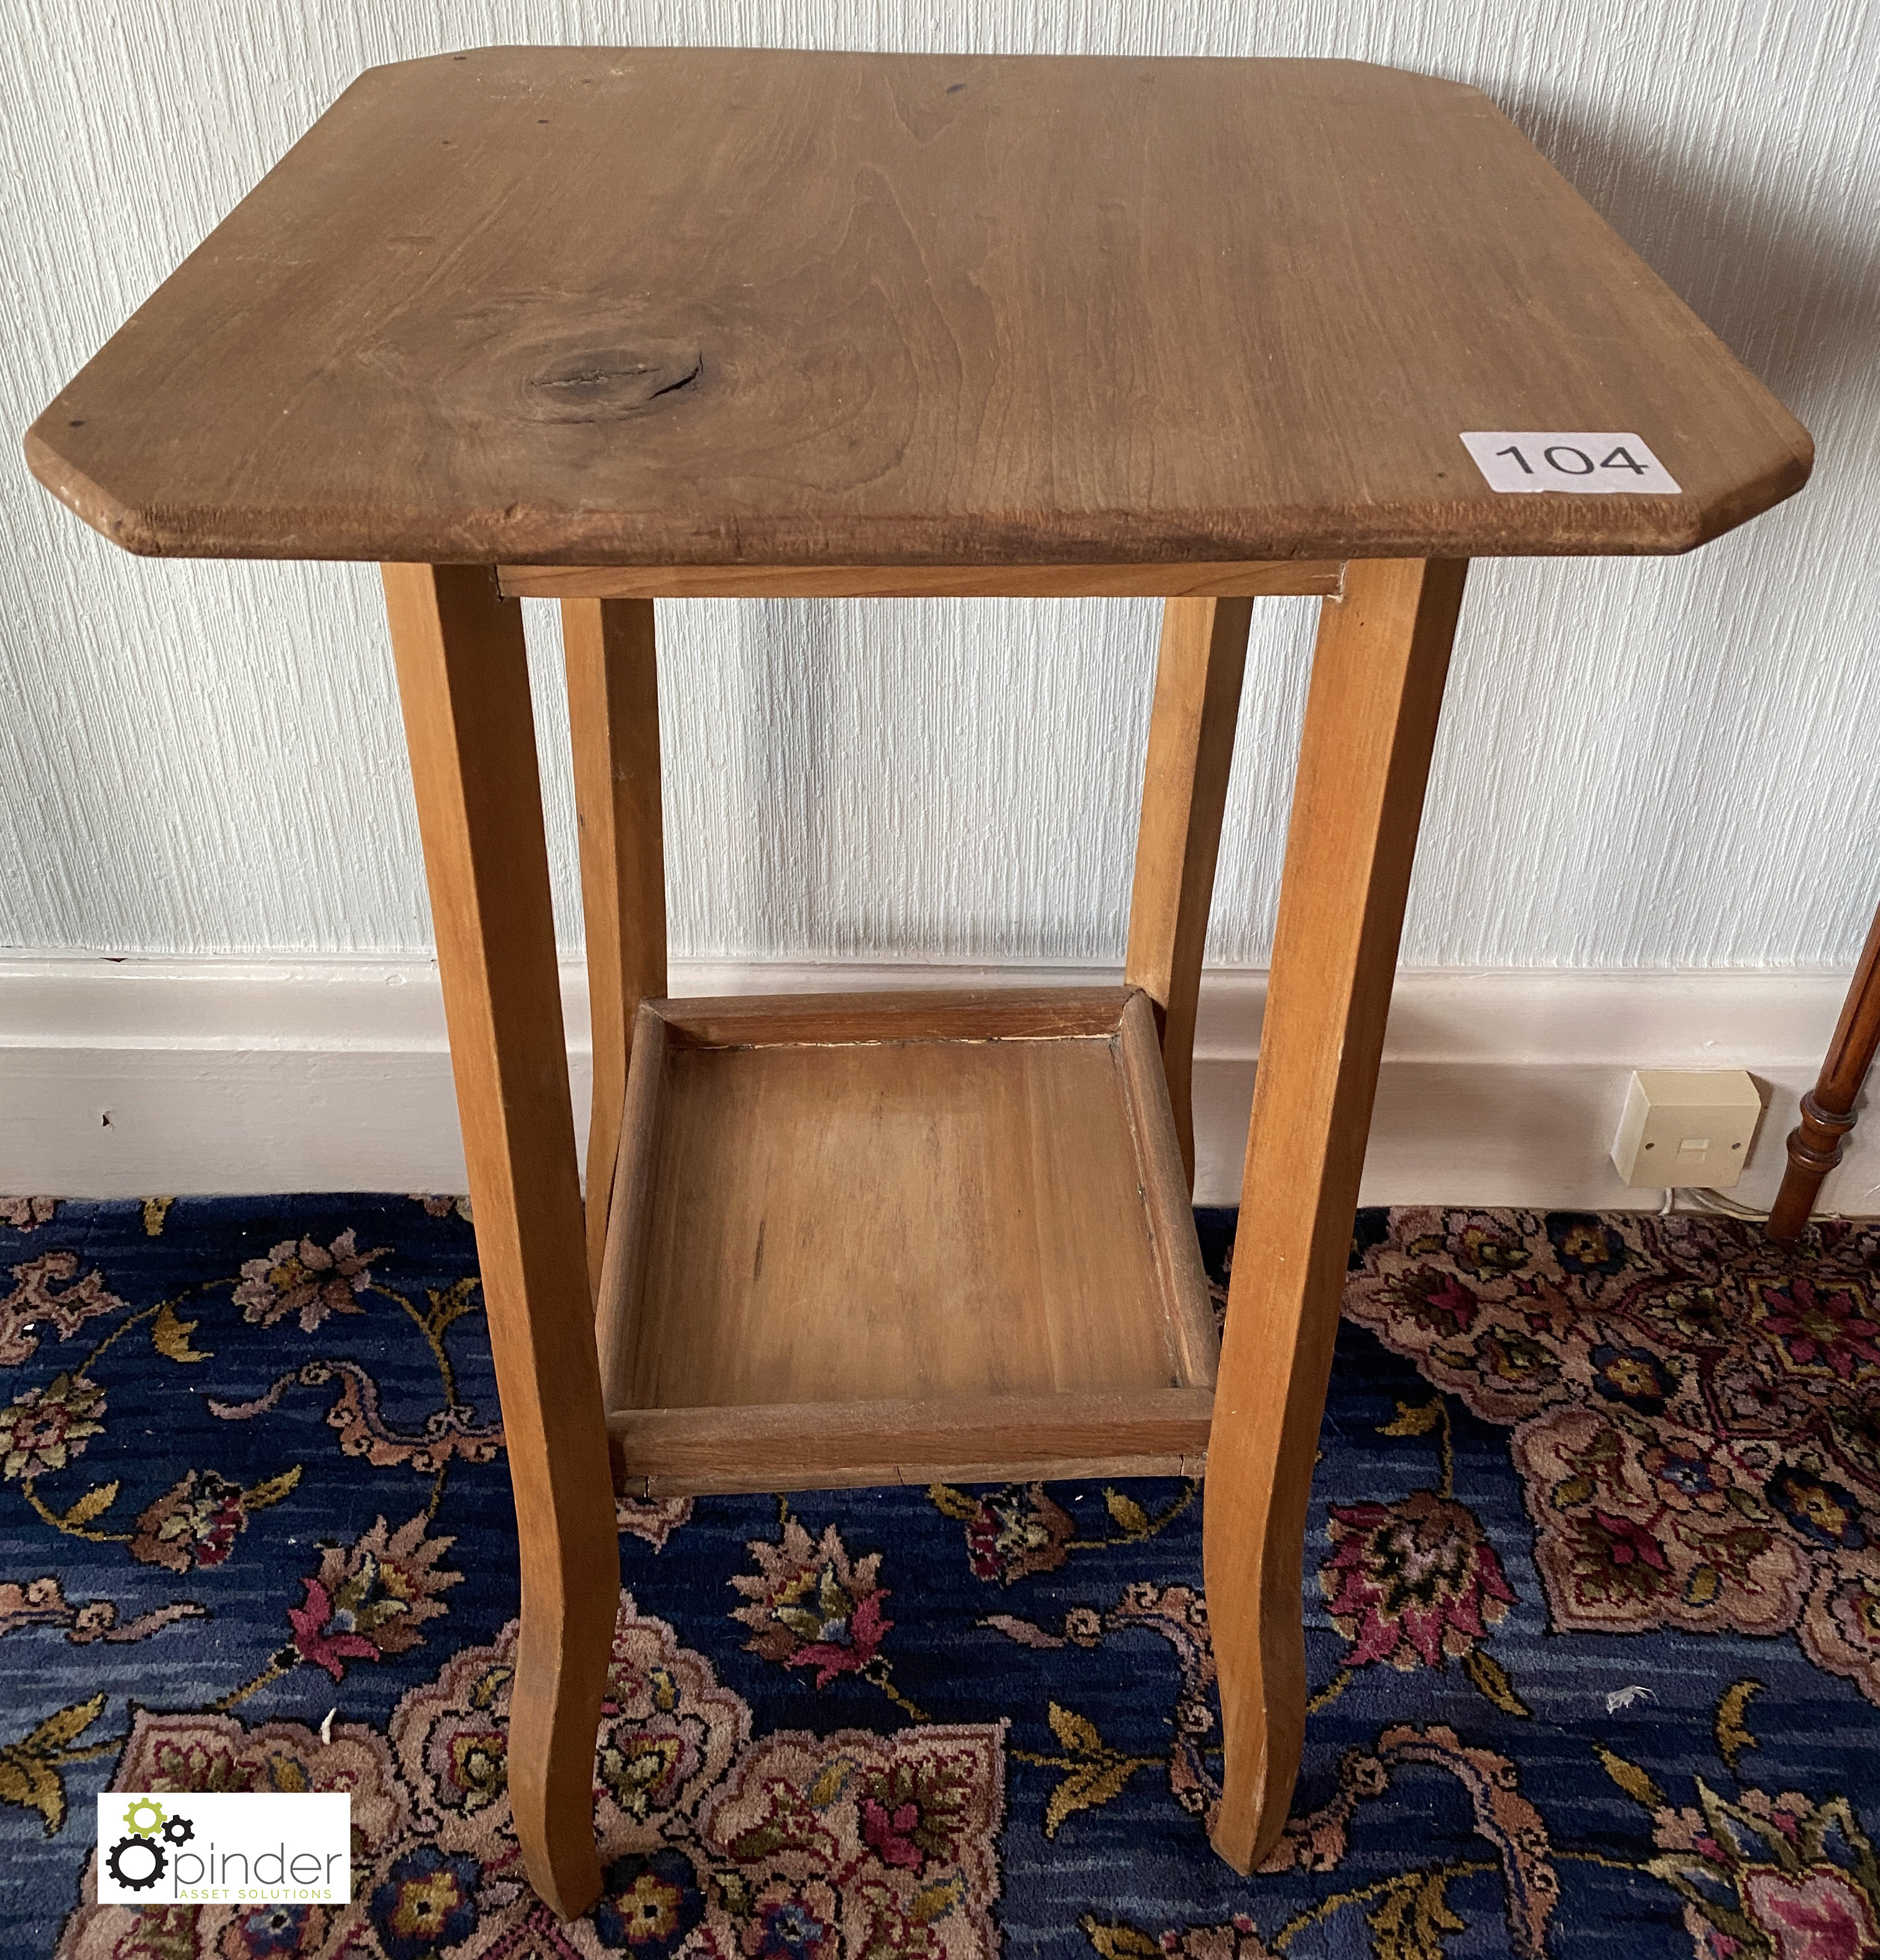 Pine Hall Table (location: Temple Newsam / collection: Tuesday 8 March between 9.30am and 12noon)